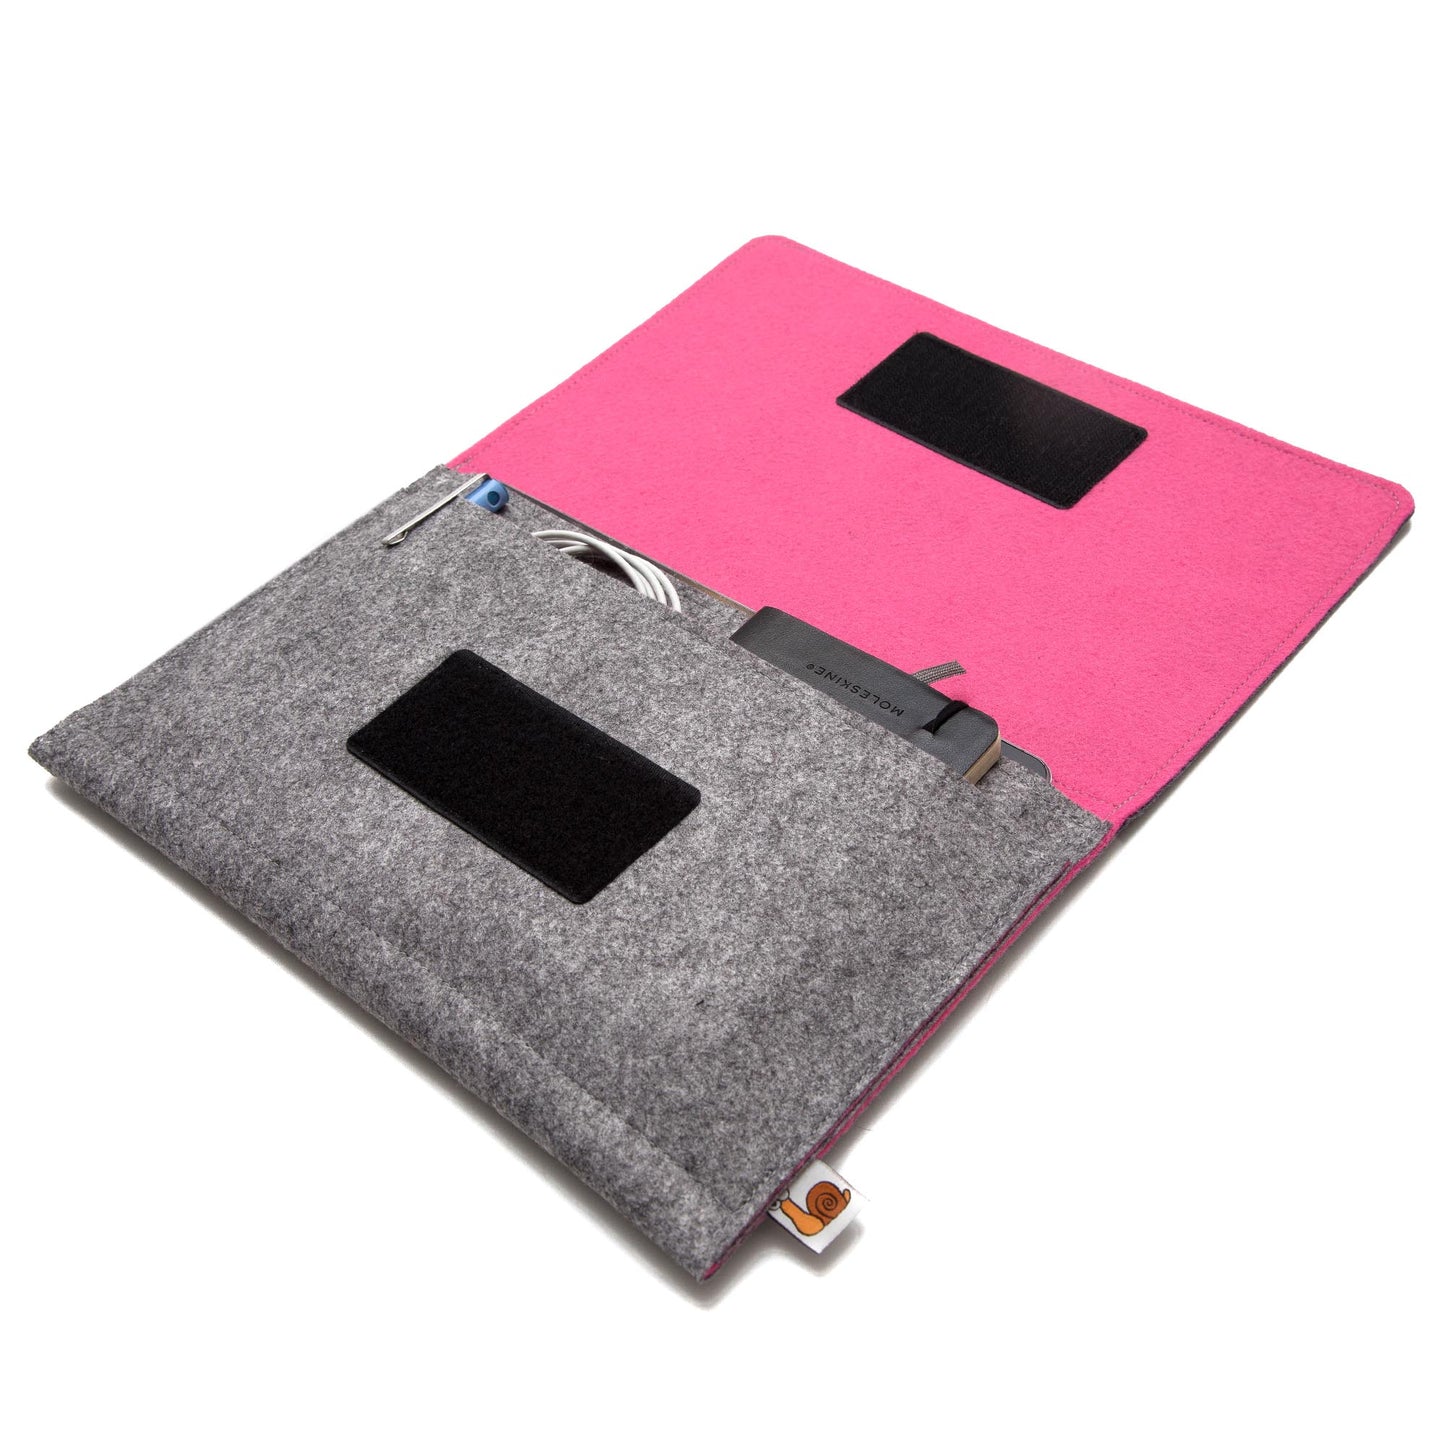 Premium Felt iPad Cover: Ultimate Protection with Accessories Pocket - Grey & Pink